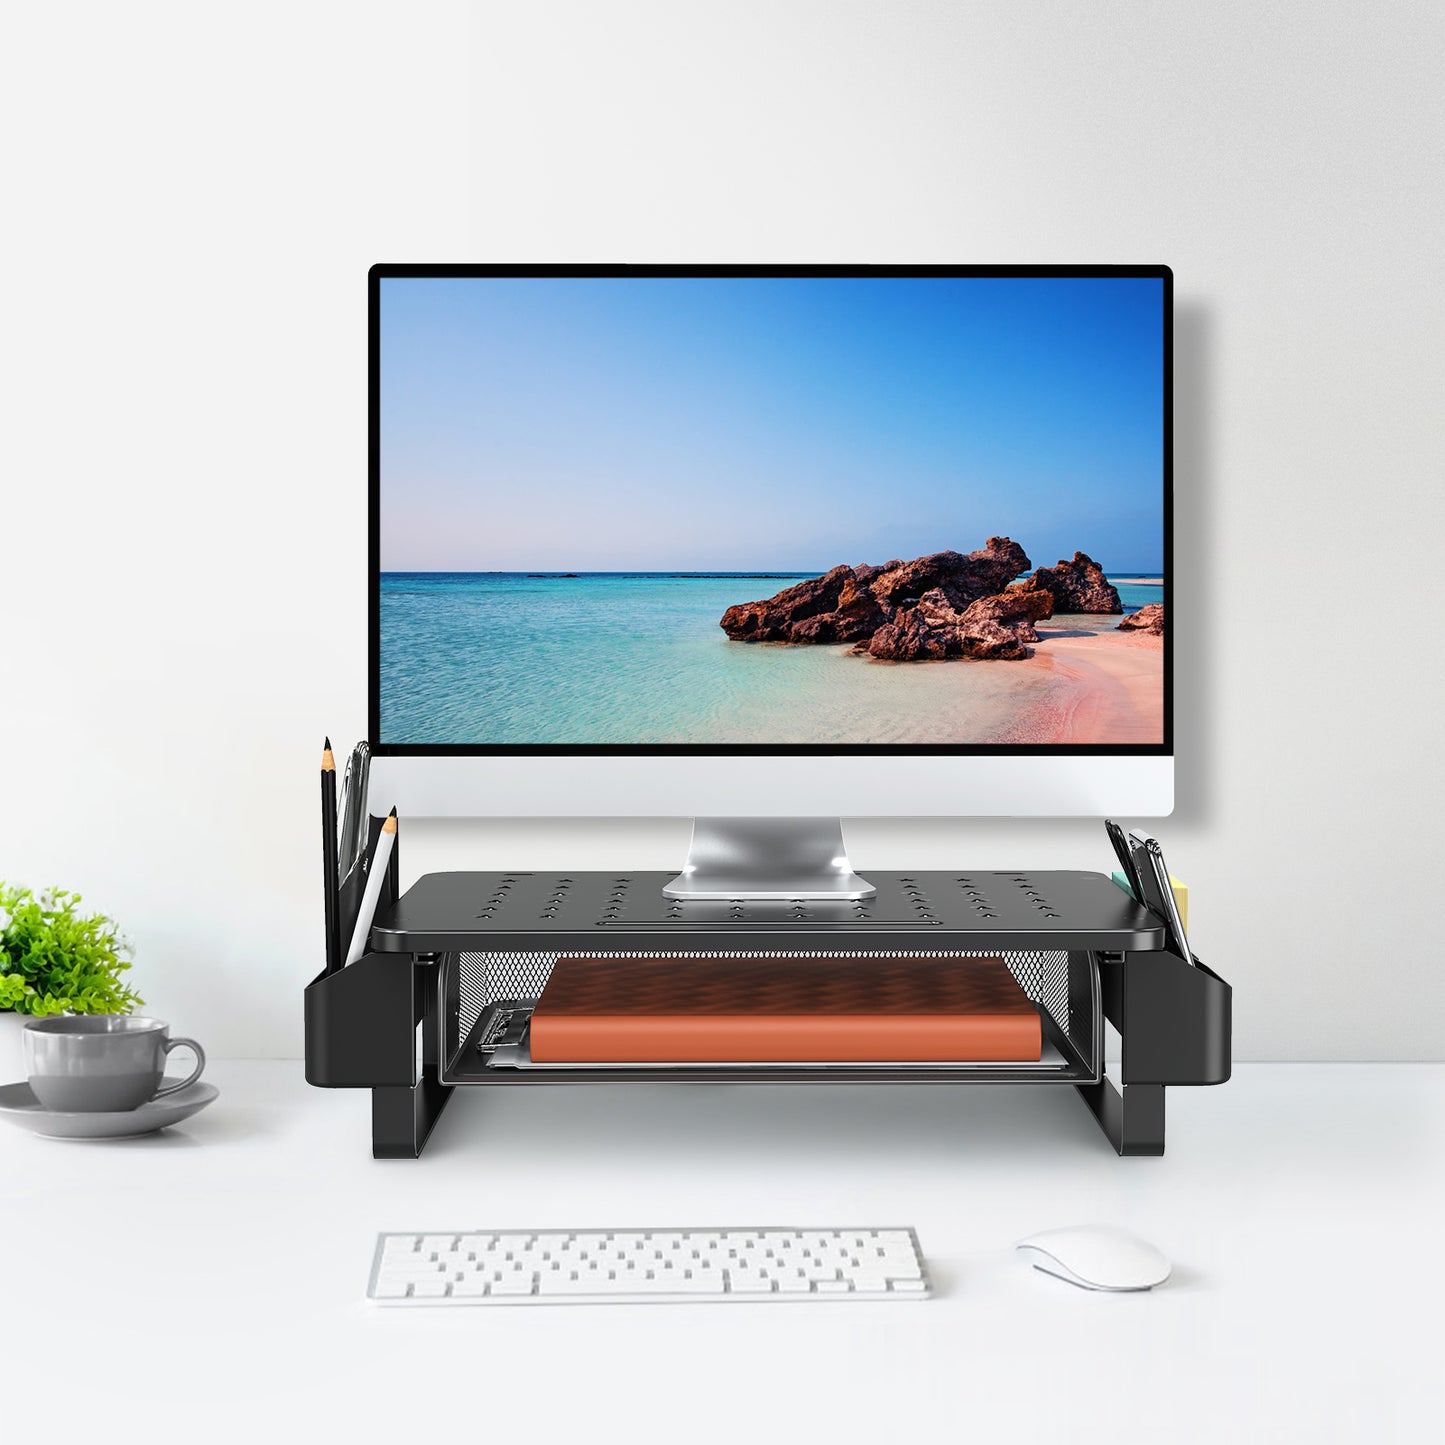 Monitor Stand Riser with Storage